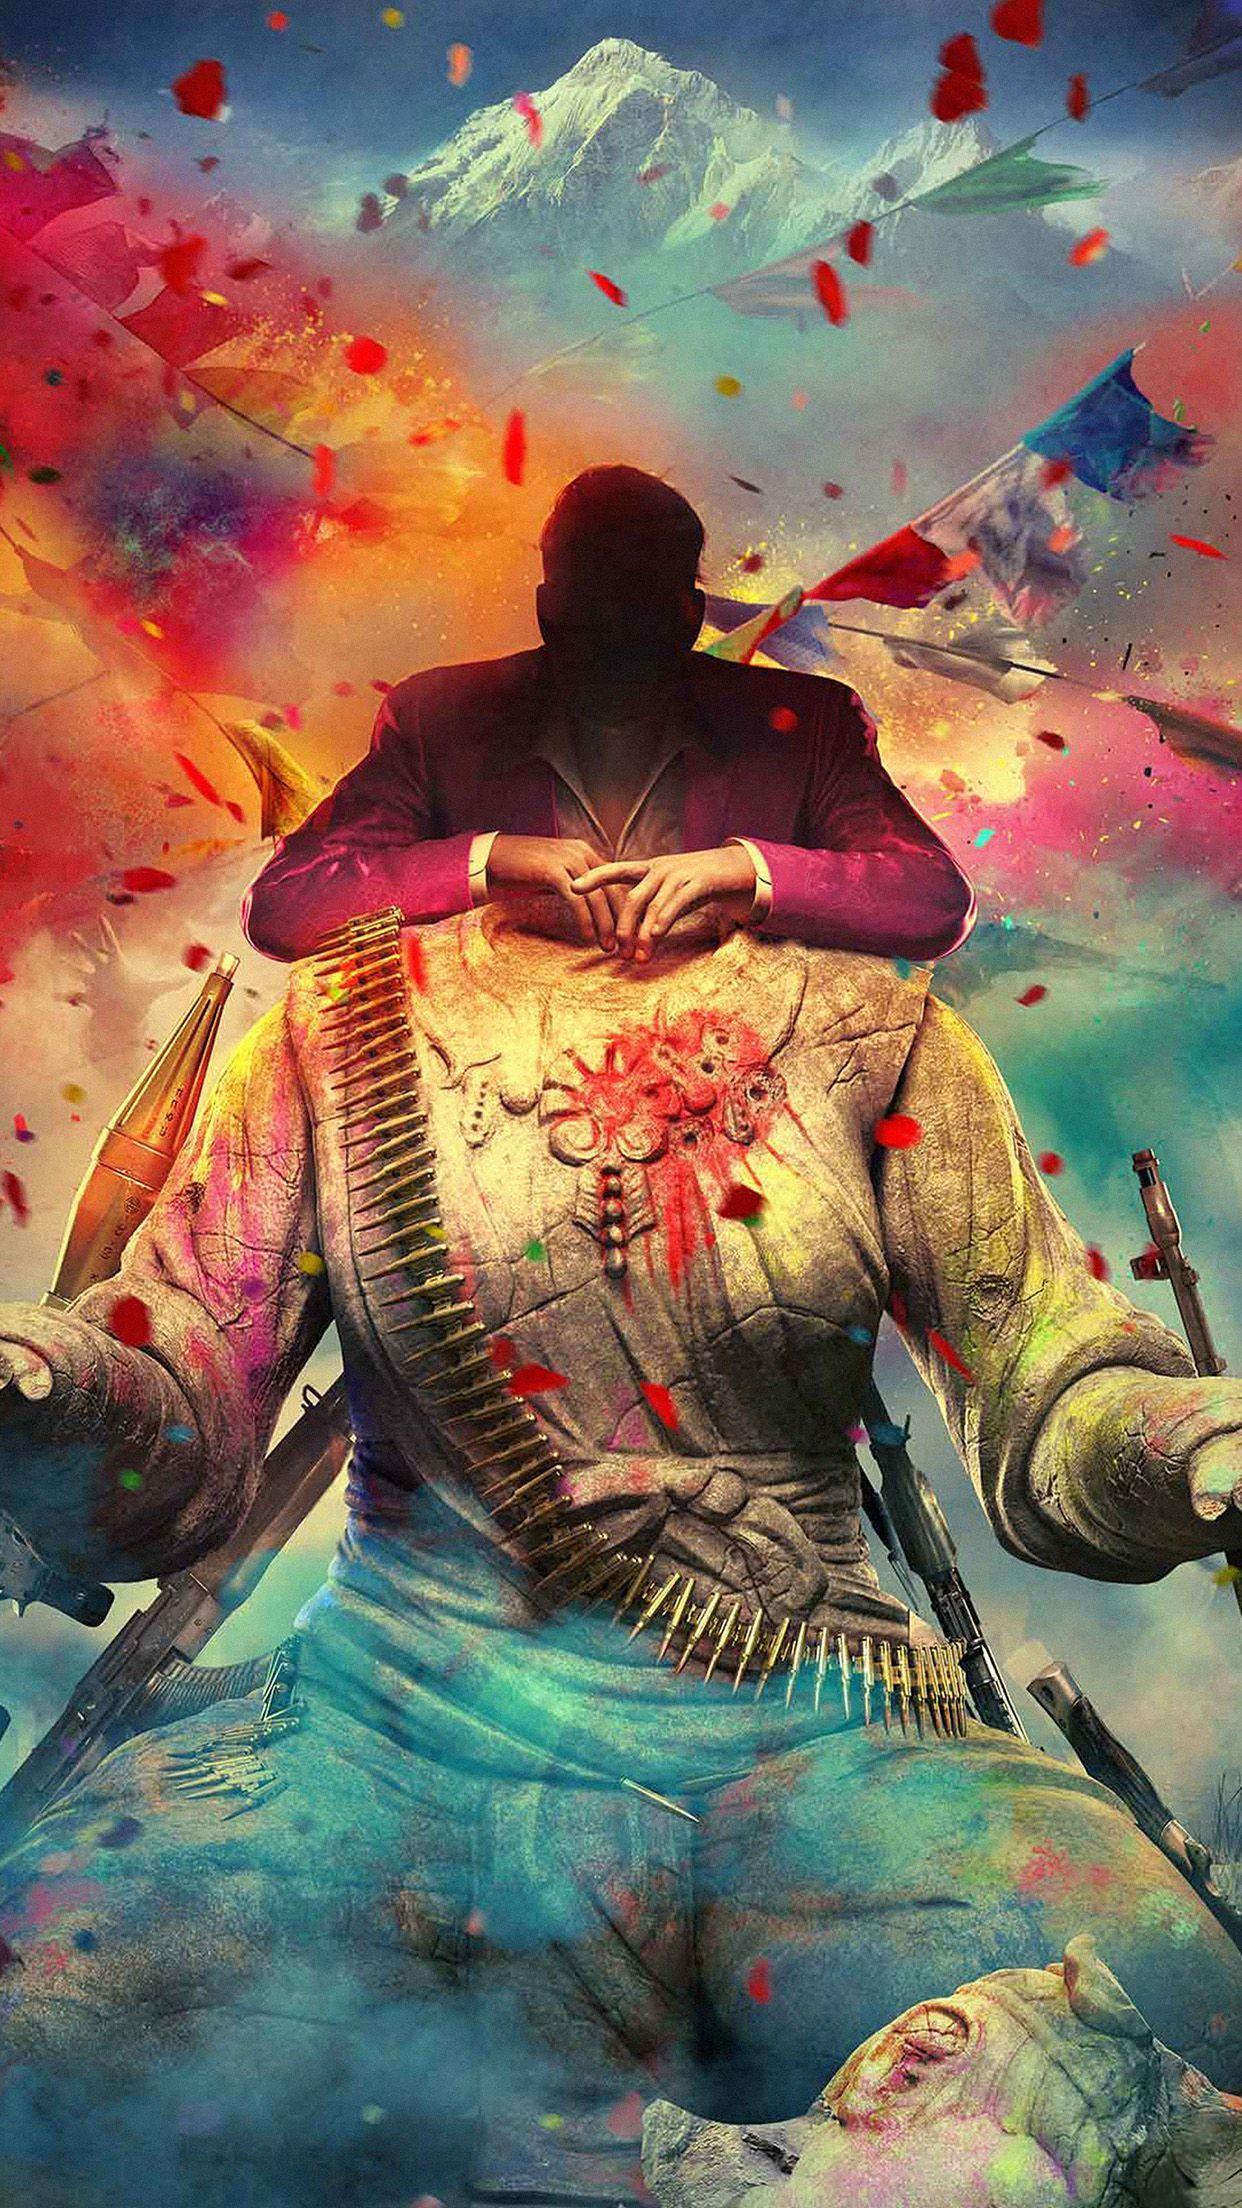 Far Cry 4 Game Digital Art Android Wallpaper. <3 Stories. Far cry